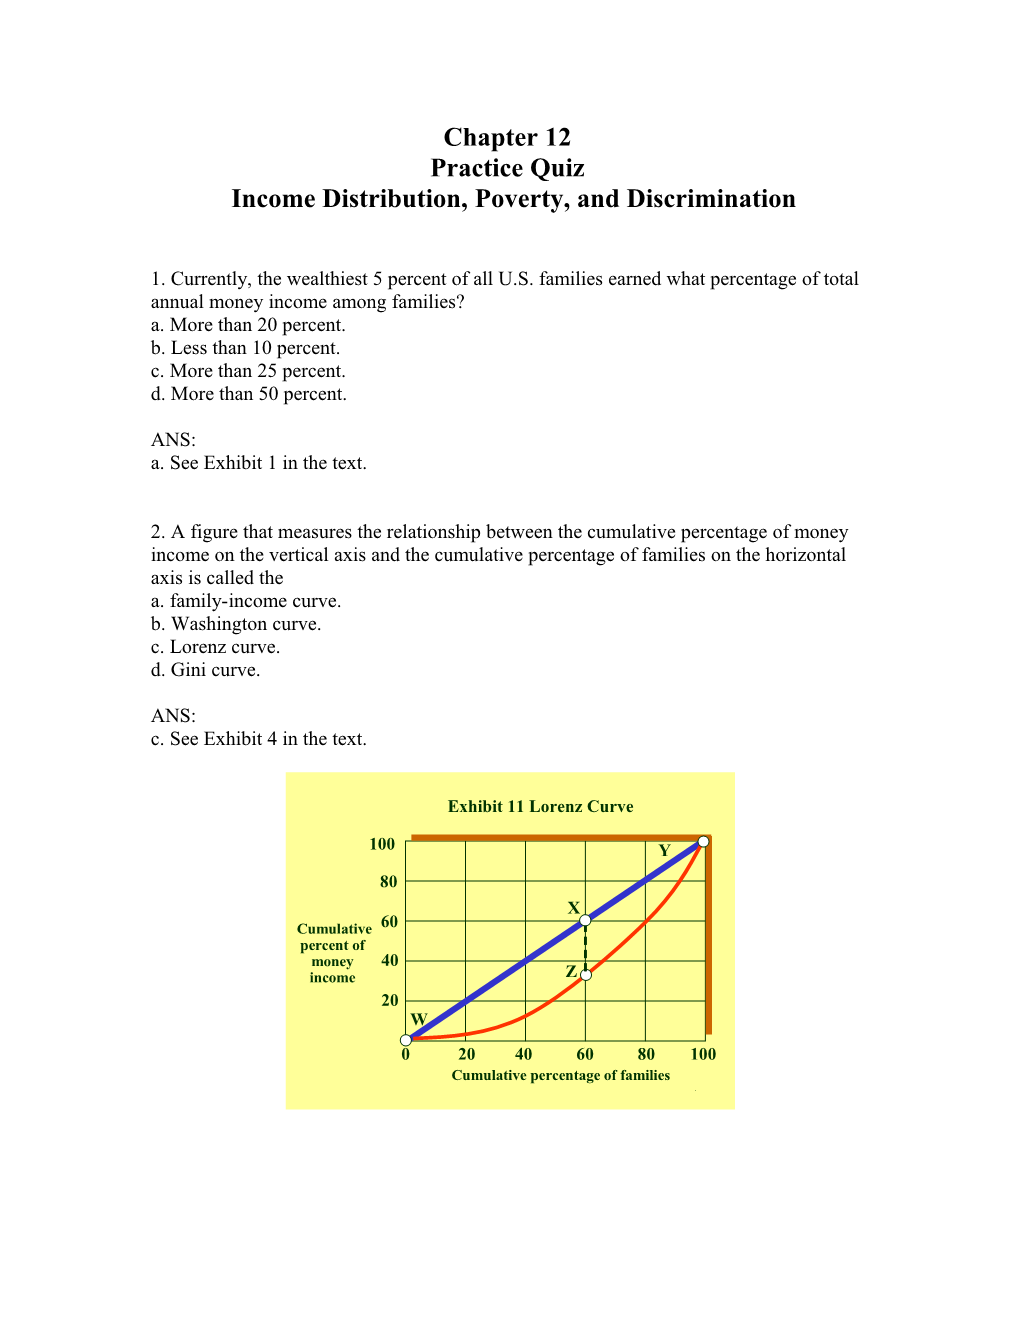 Chapter 12 Practice Quiz Income Distribution, Poverty, and Discrimination